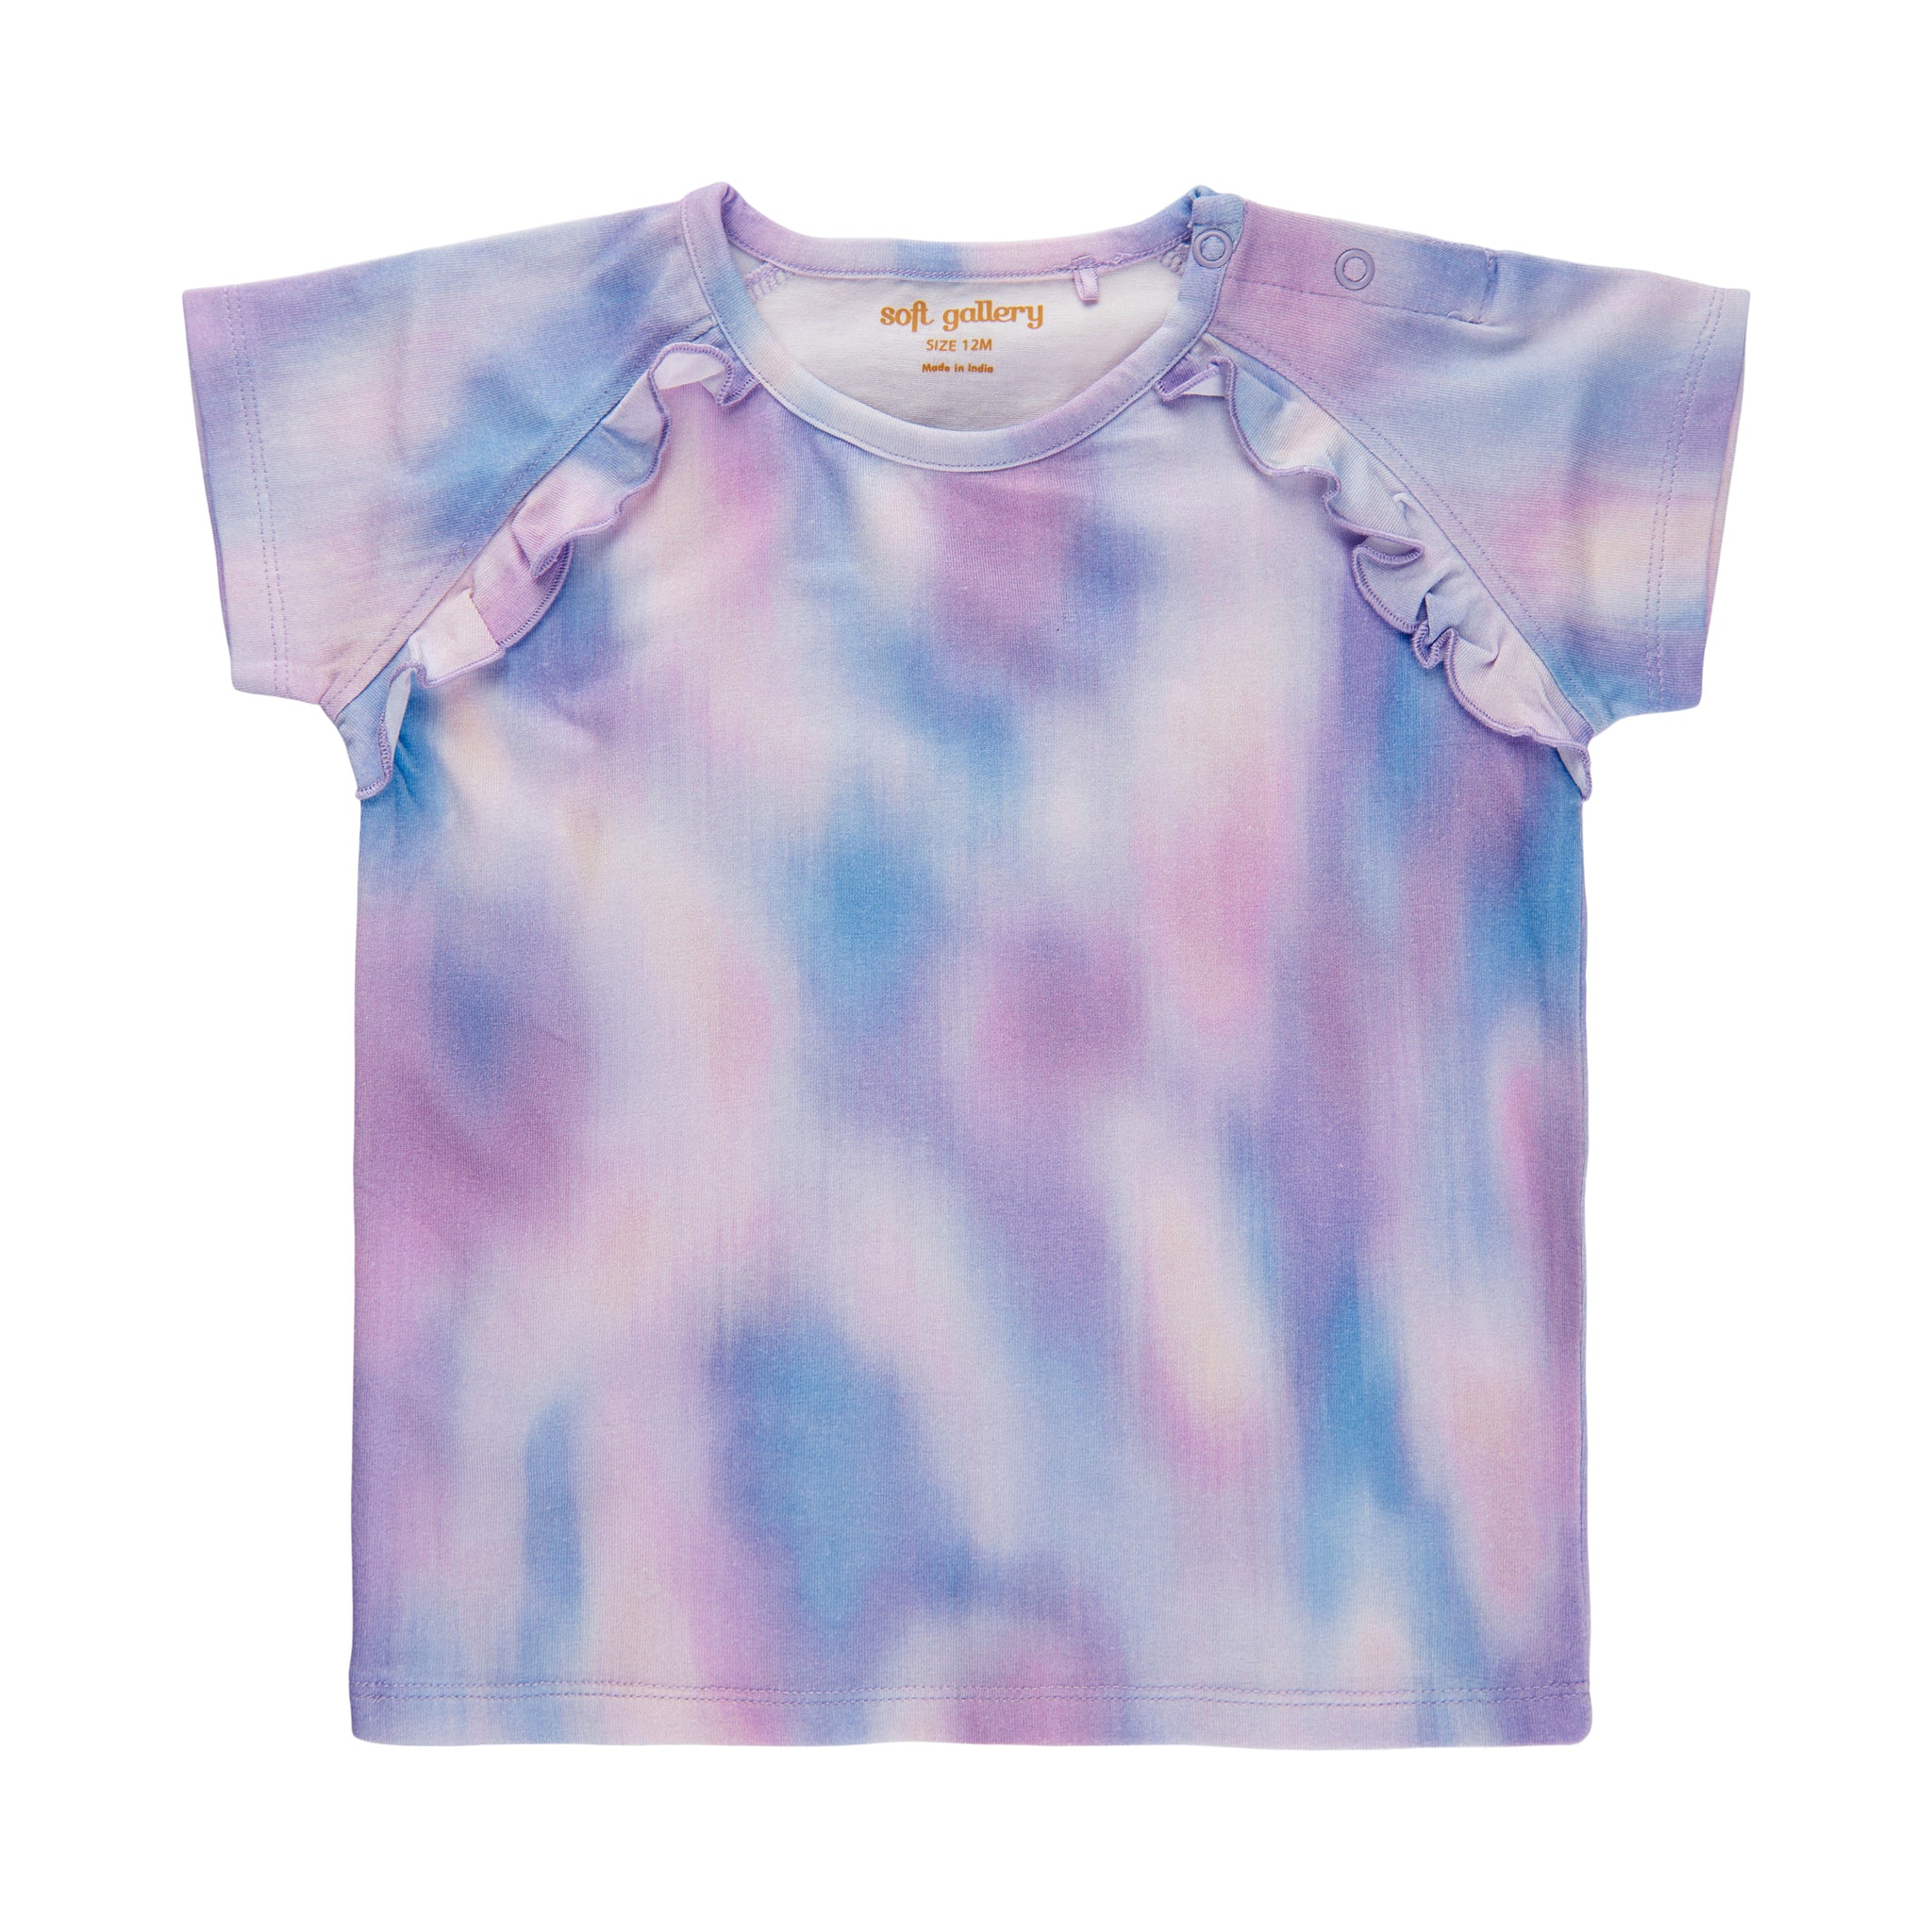 Soft Gallery - Jisela Reflections SS Tee - Orchid Bloom